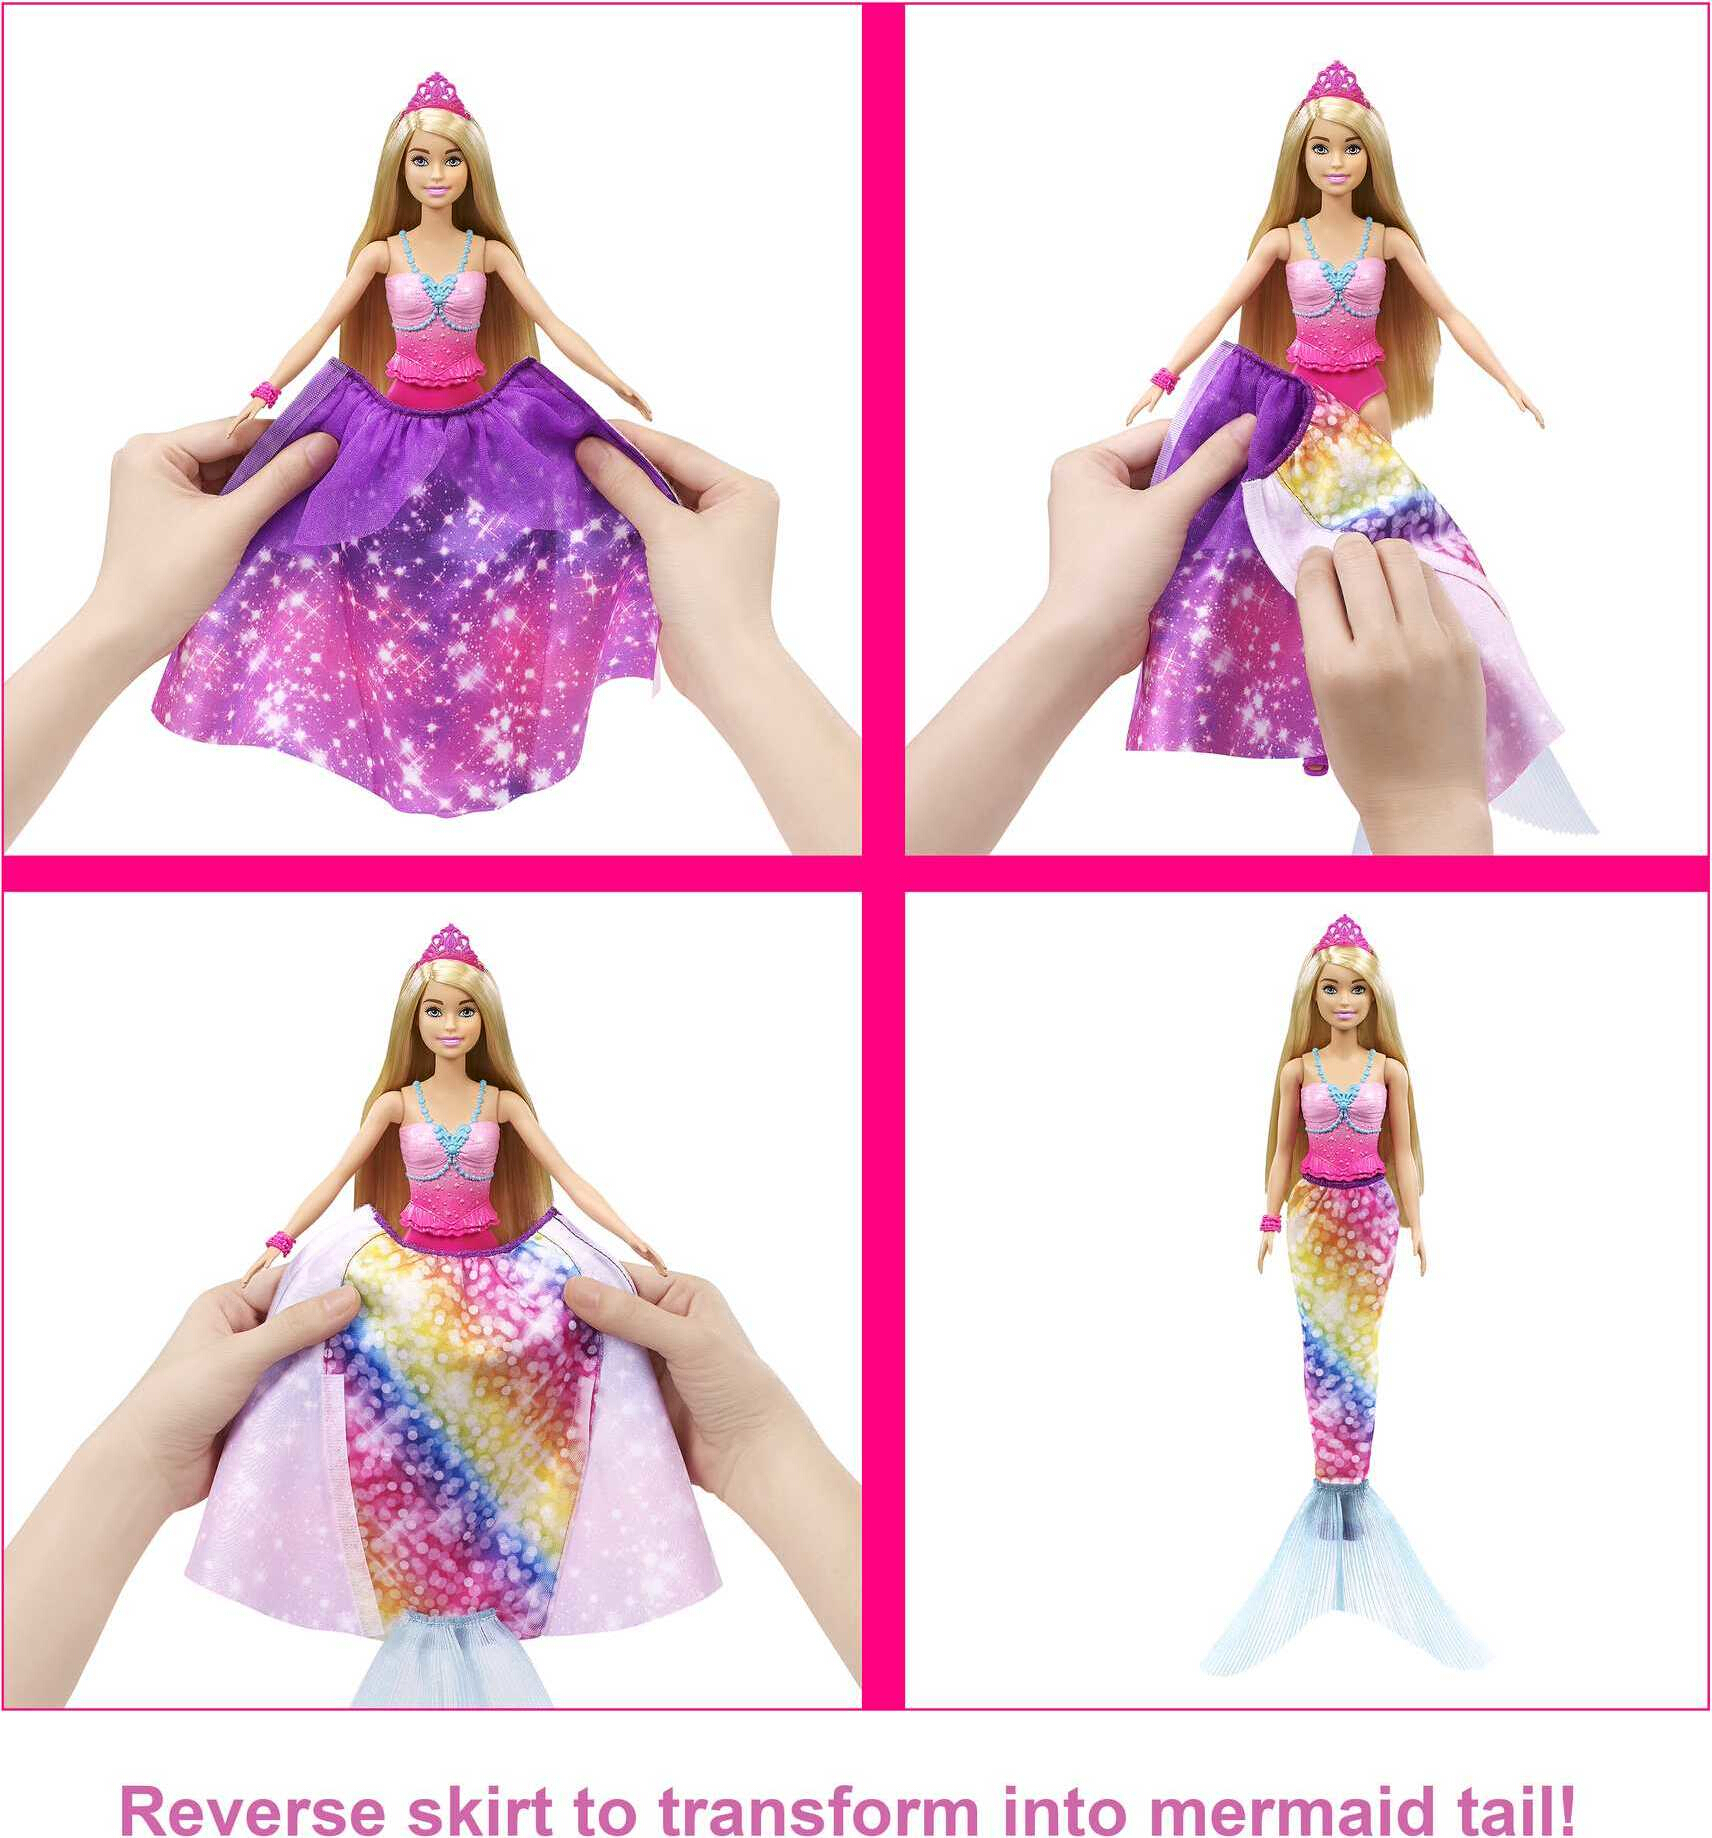 Barbie Dreamtopia Fantasy Doll, 2-in-1 Royal to Mermaid Transformation with Accessories - image 4 of 6